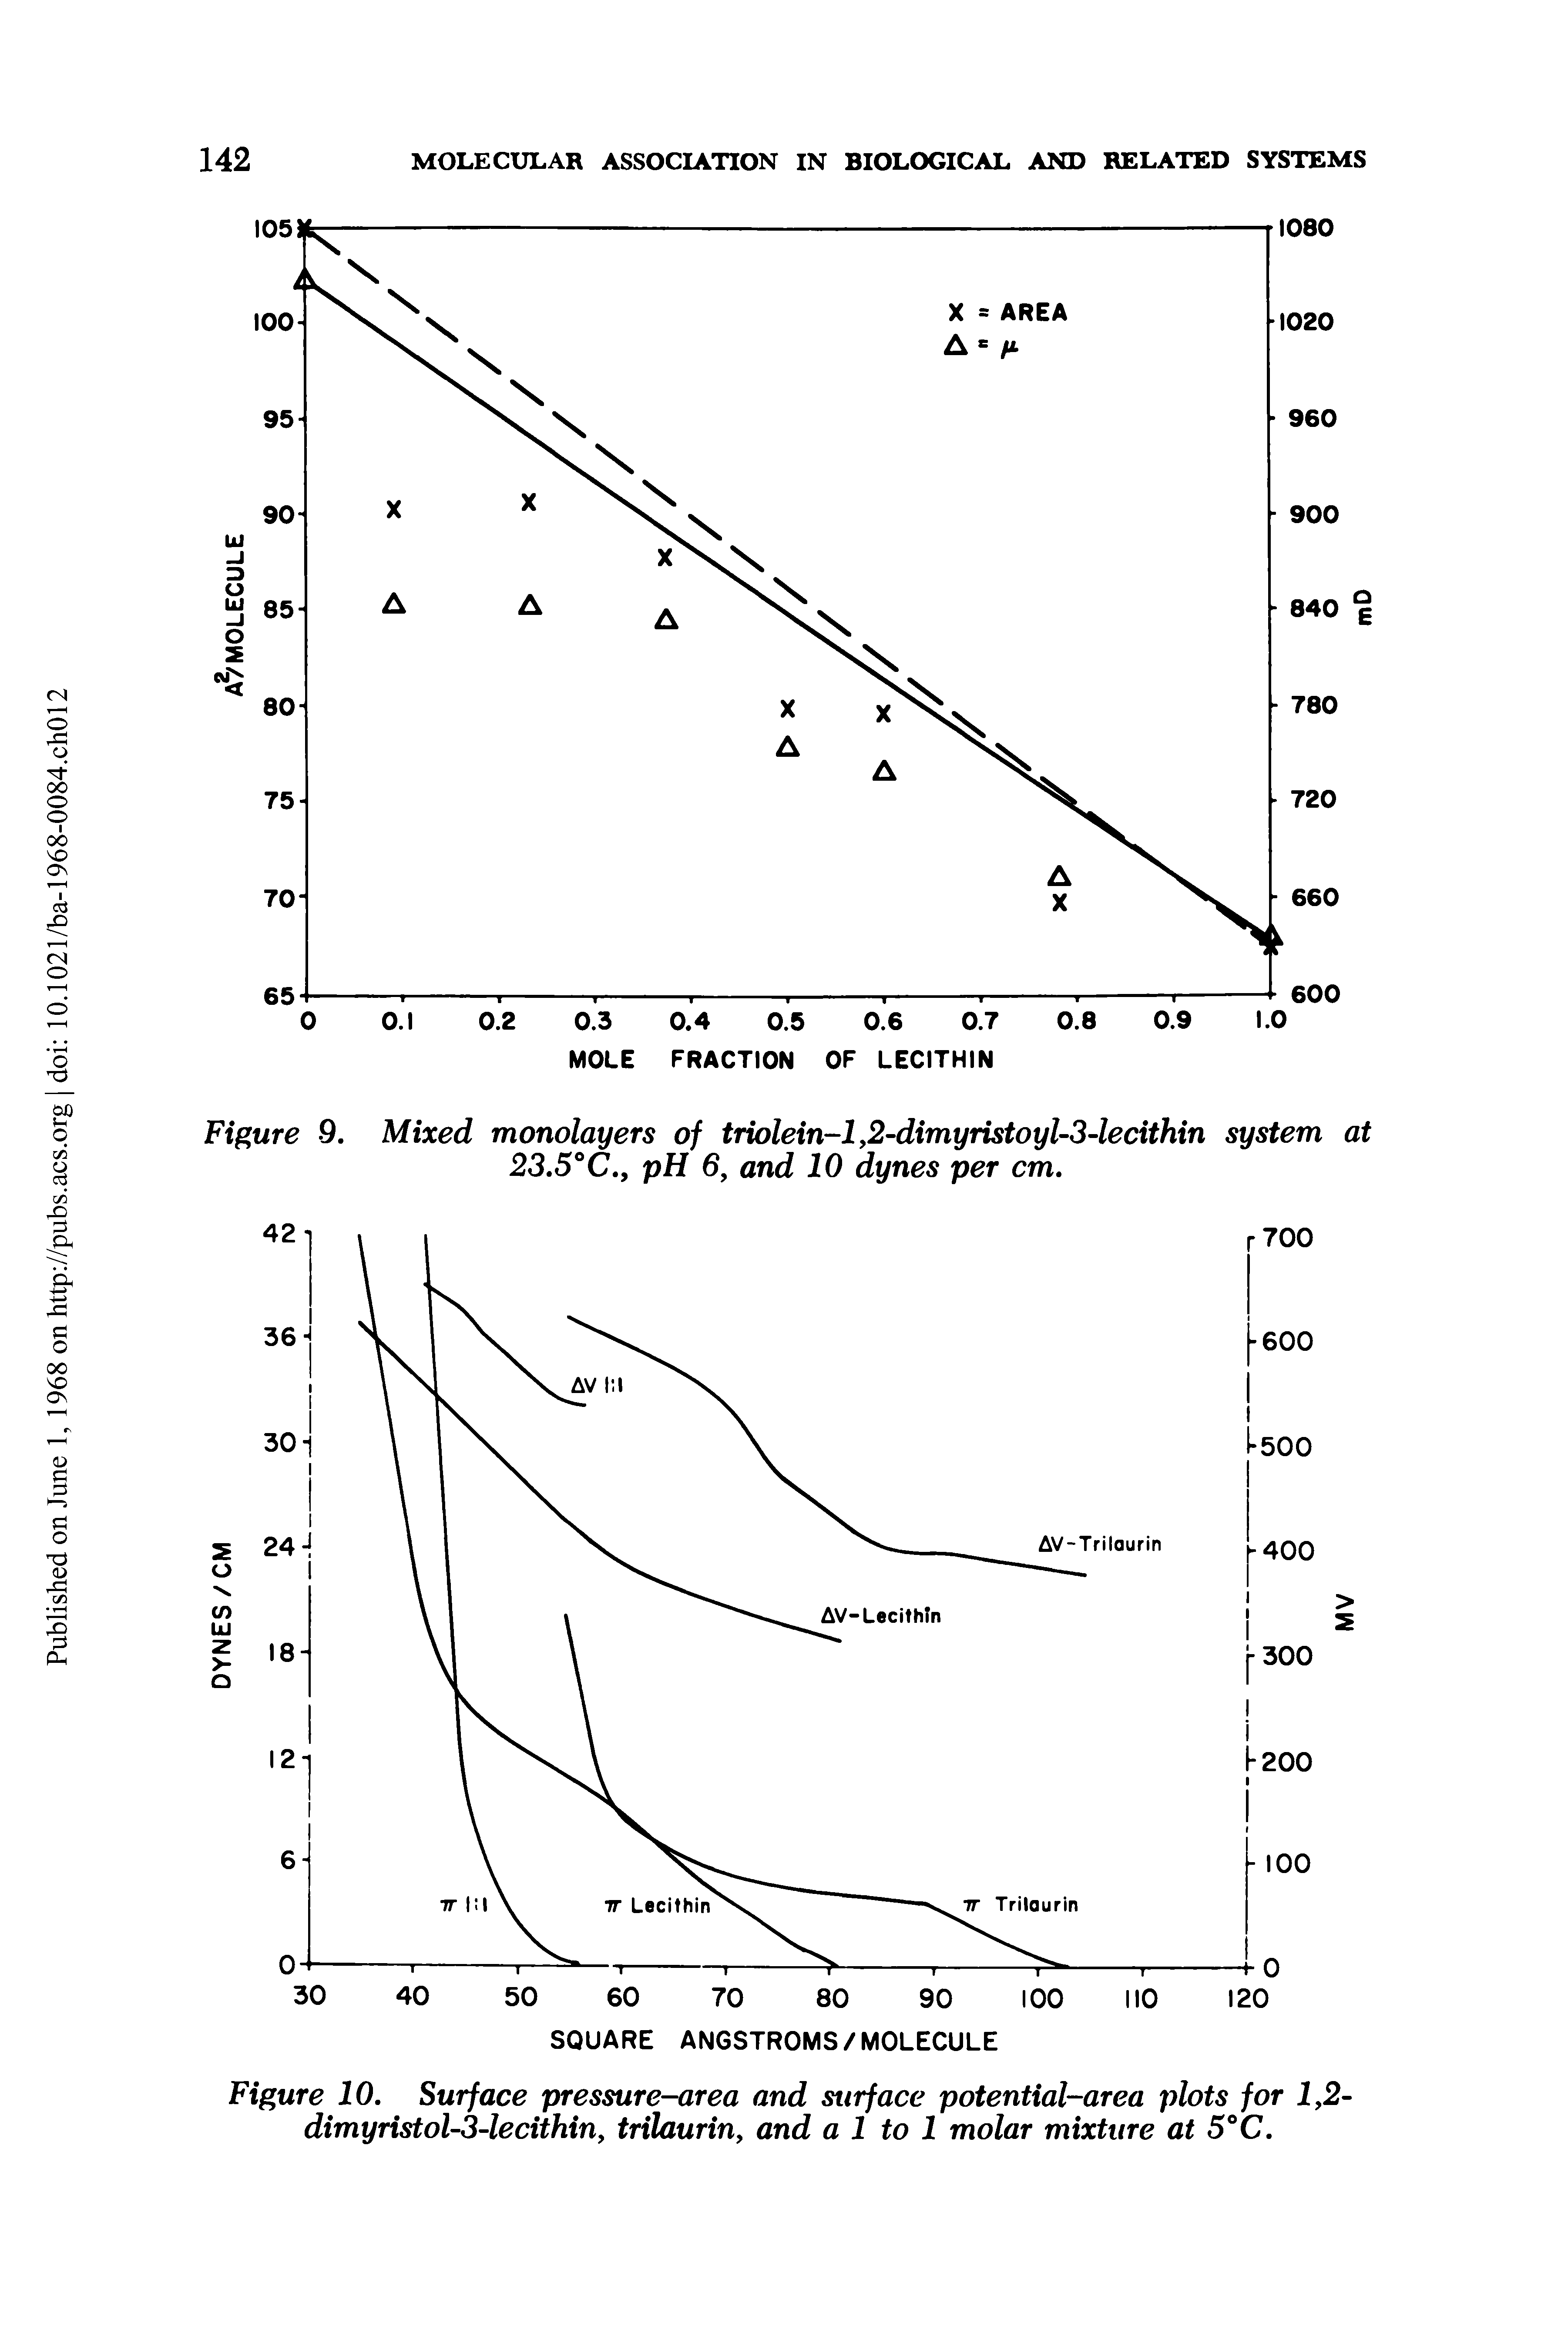 Figure 10. Surface pressure-area and surface potential-area plots for 1,2-dimyristol-3-lecithin, trilaurin, and a 1 to 1 molar mixture at 5°C.